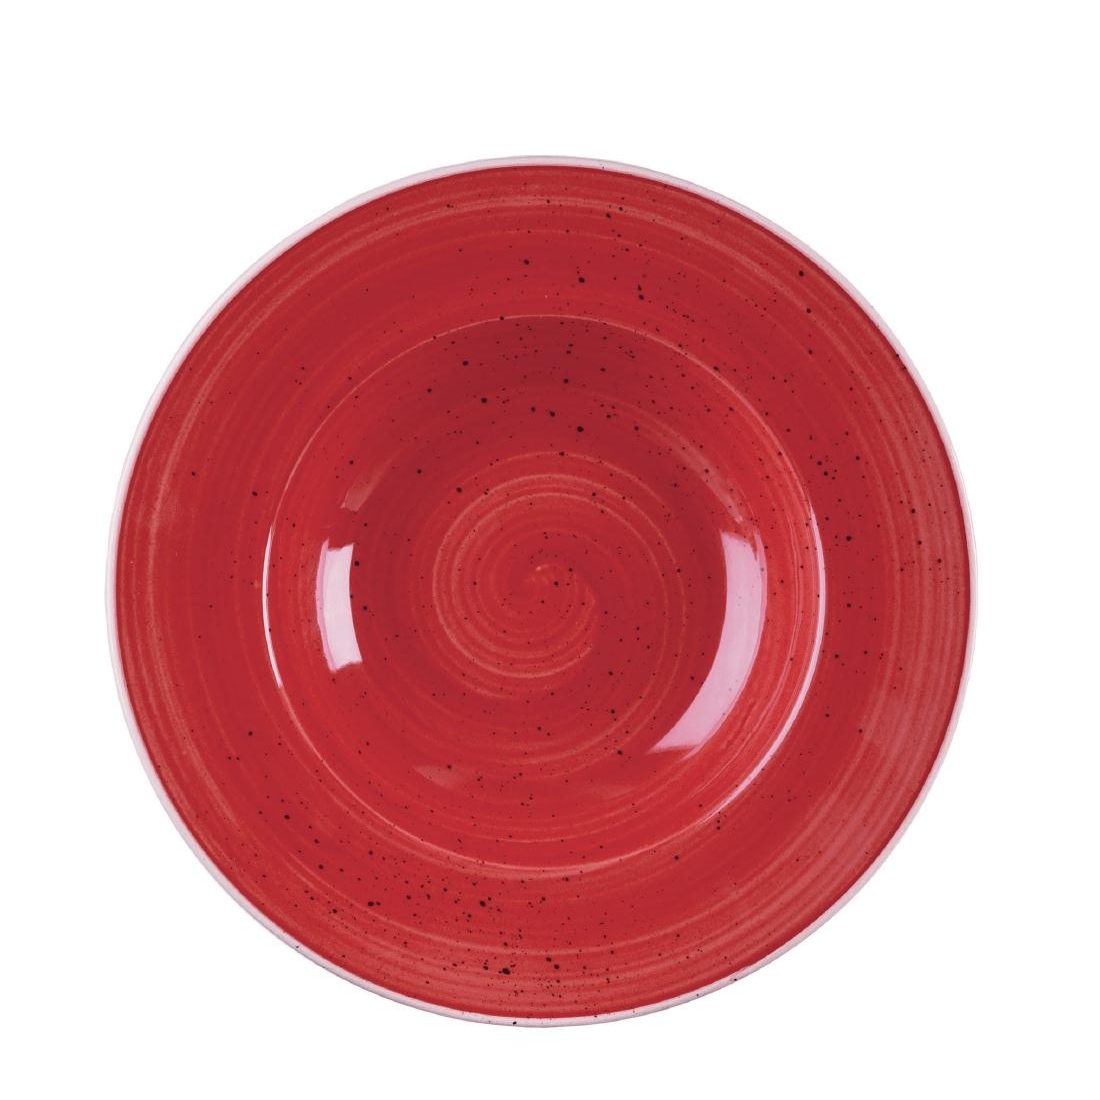 Churchill Stonecast Round Wide Rim Bowl Berry Red 240mm